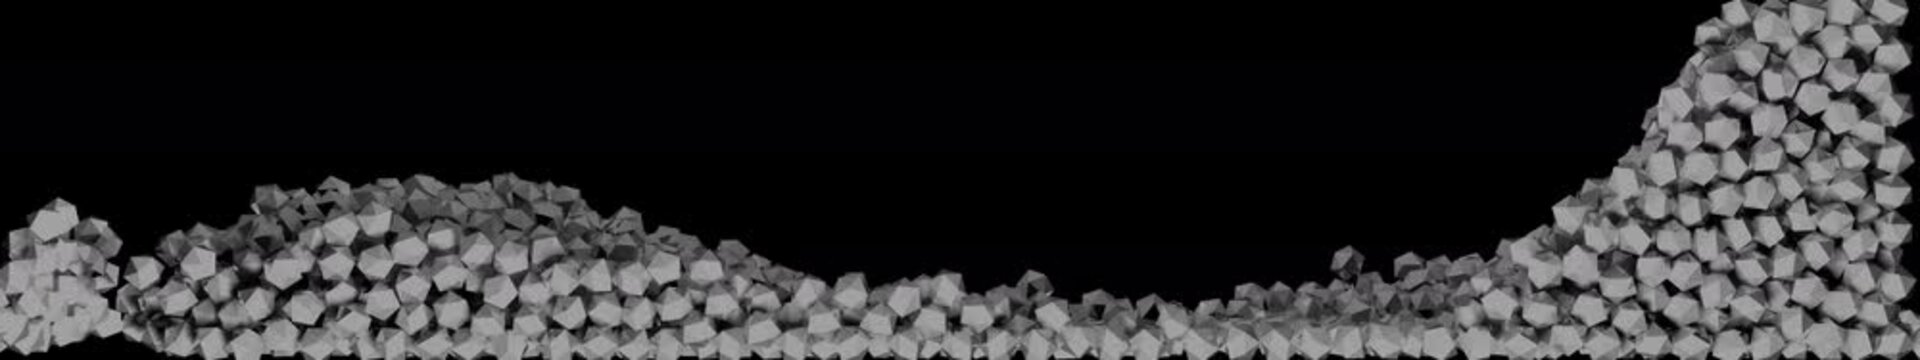 Dynamic 3D stones rendered at 5760X1080 Pixels for super wide screen use